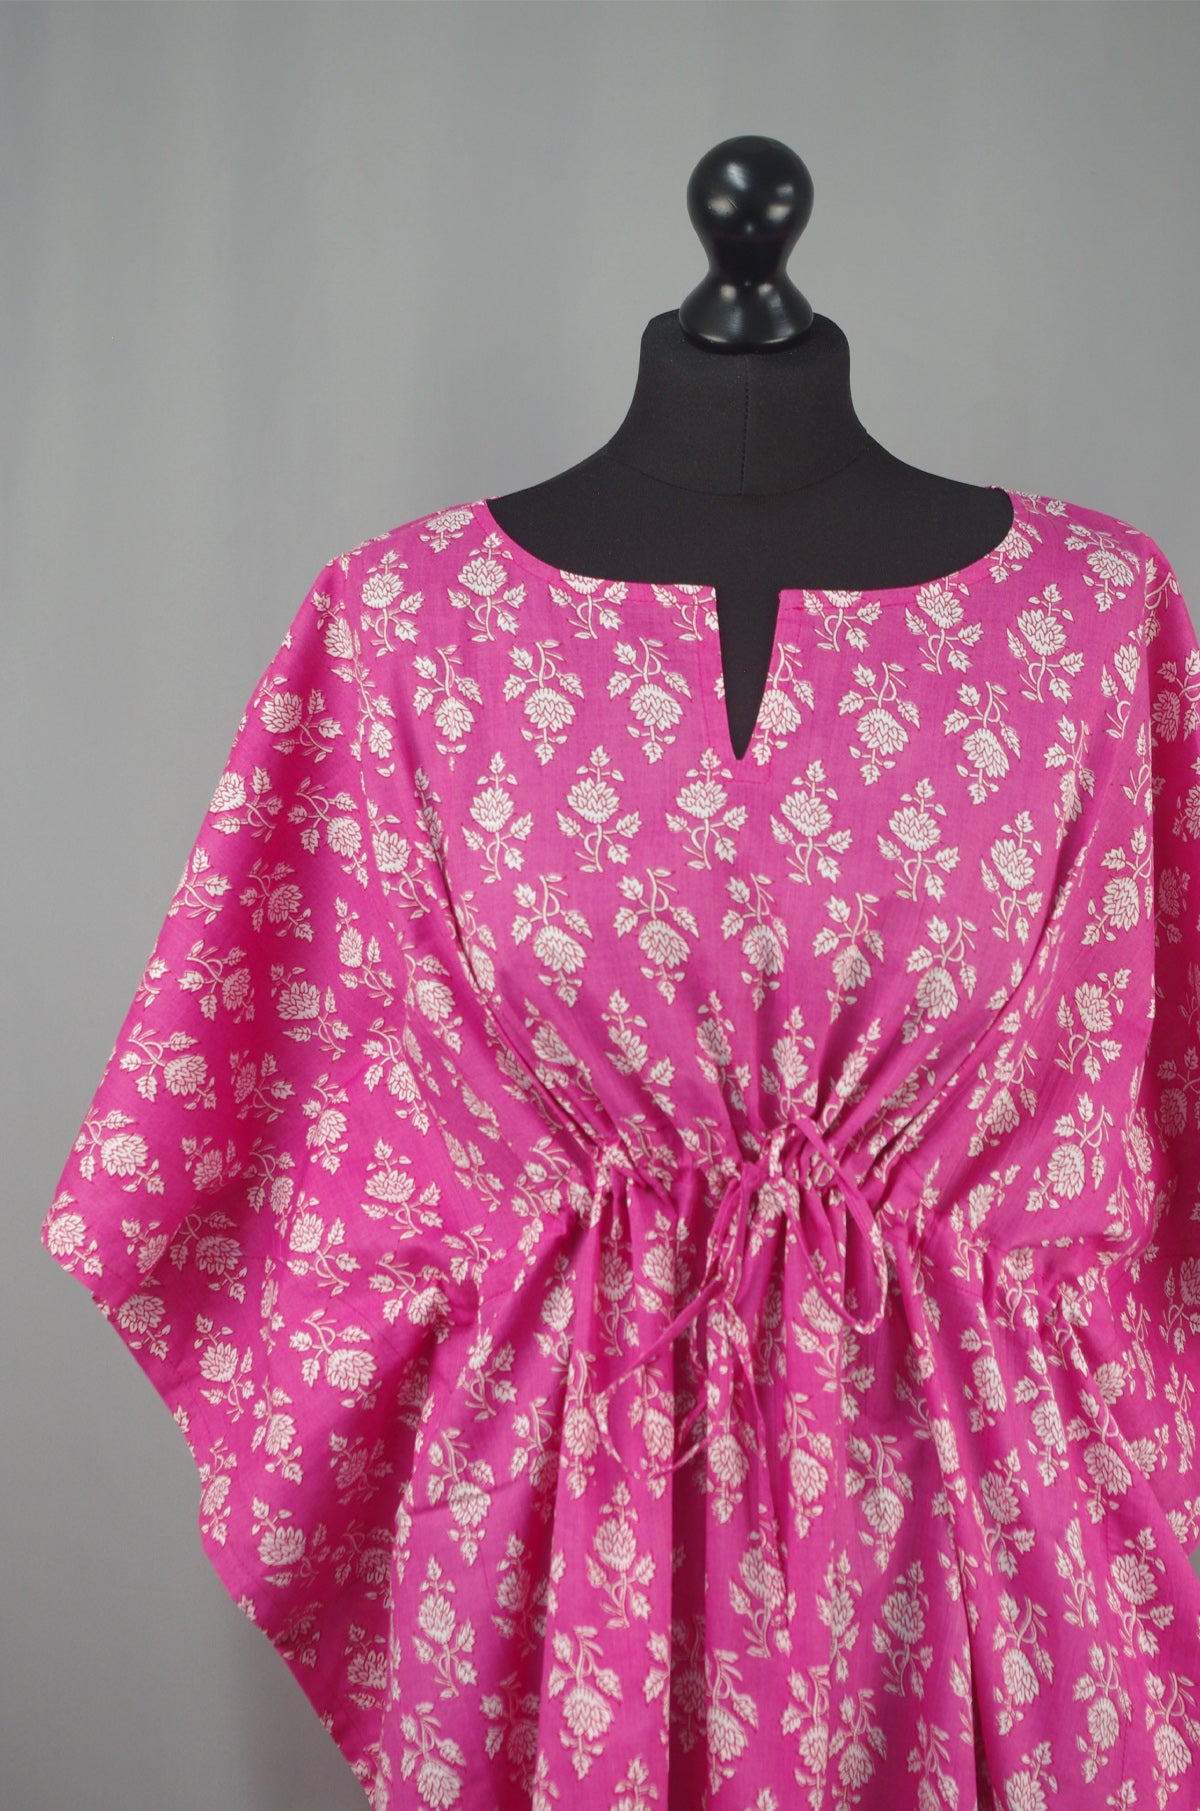 Block Printed Cotton Coverup / Kaftans - Pink Floral